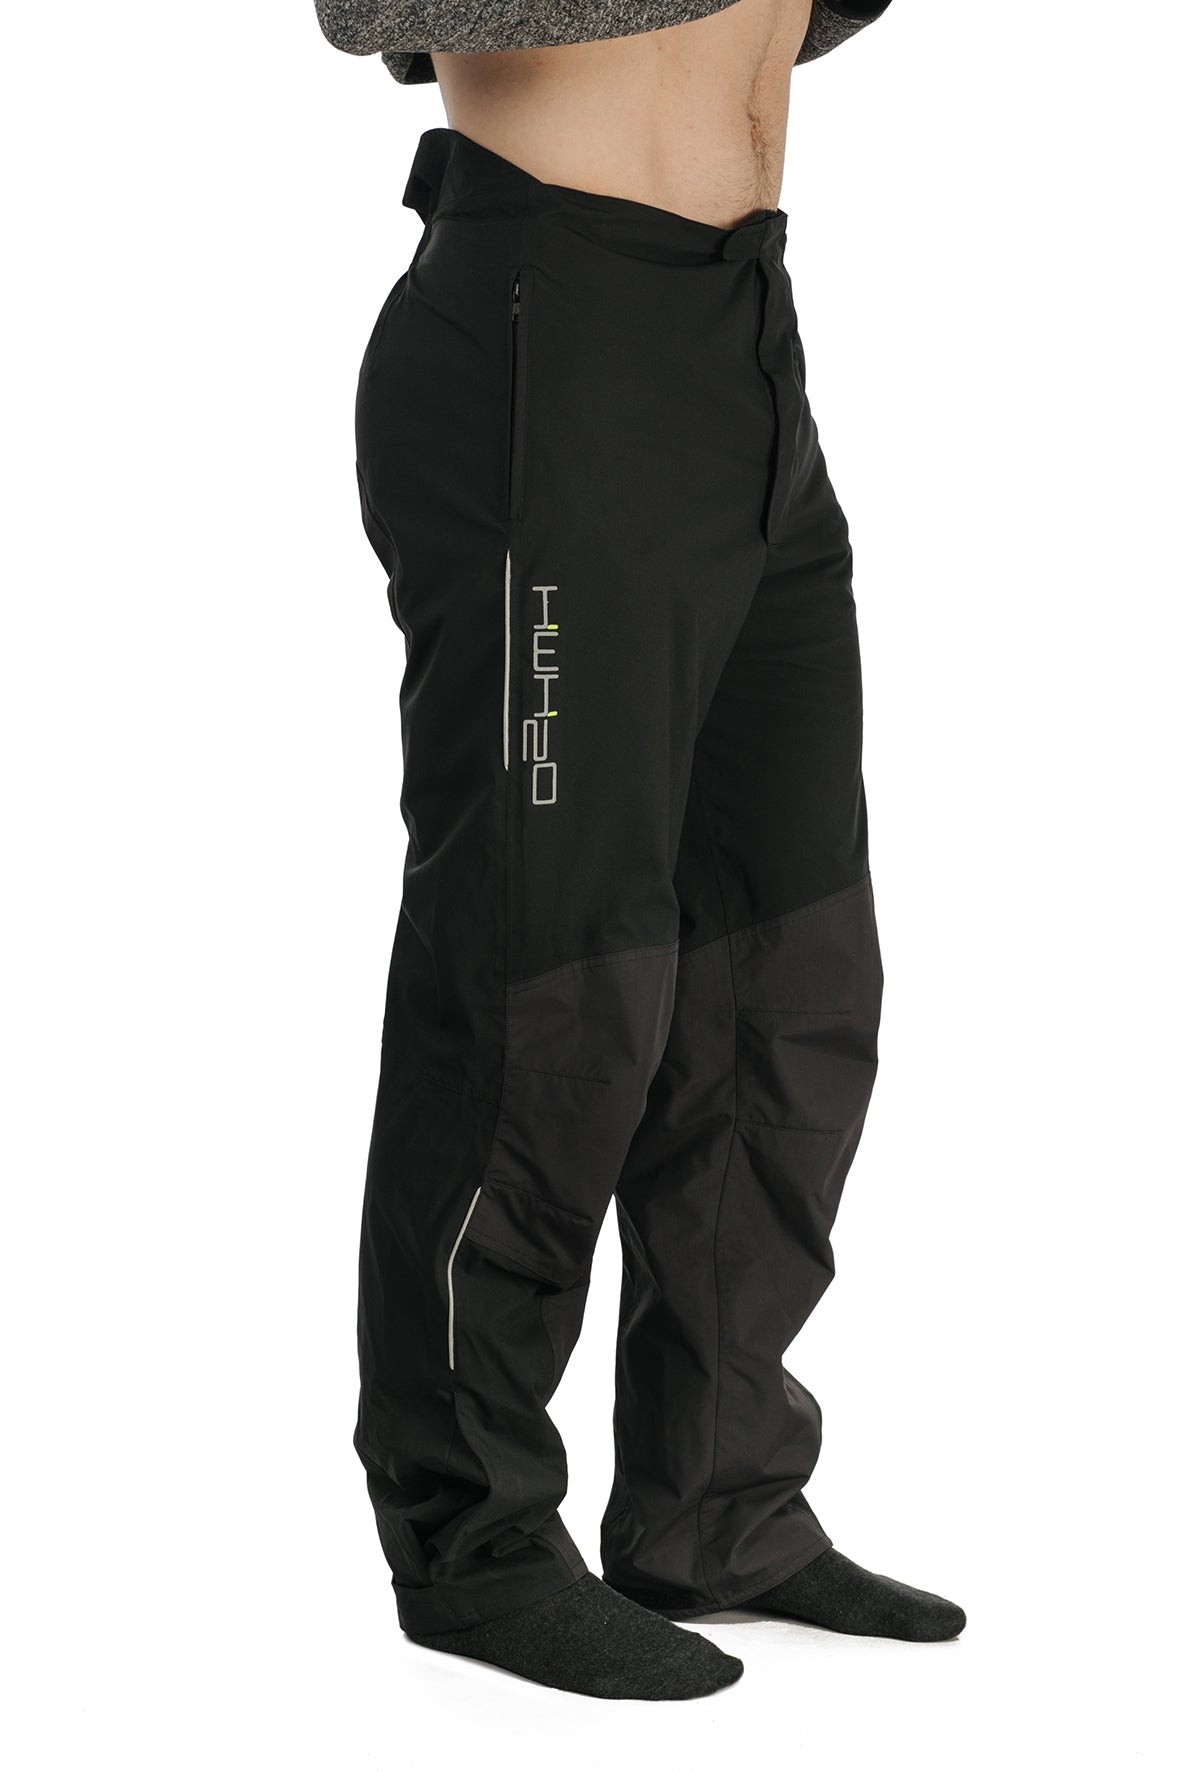 H2O Trousers – SHOP. at Spruce Meadows